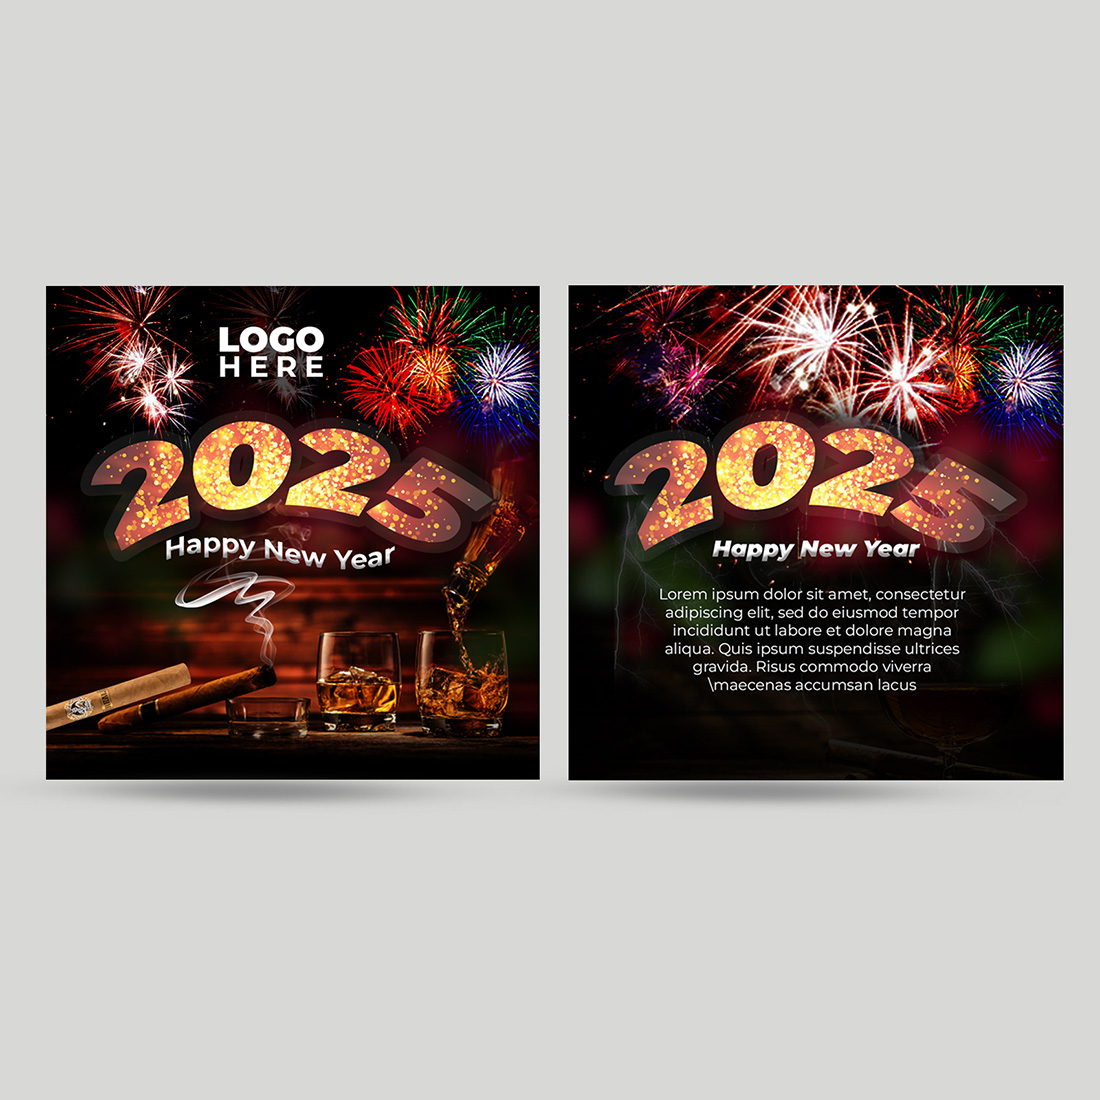 New Year Flyer Design cover image.